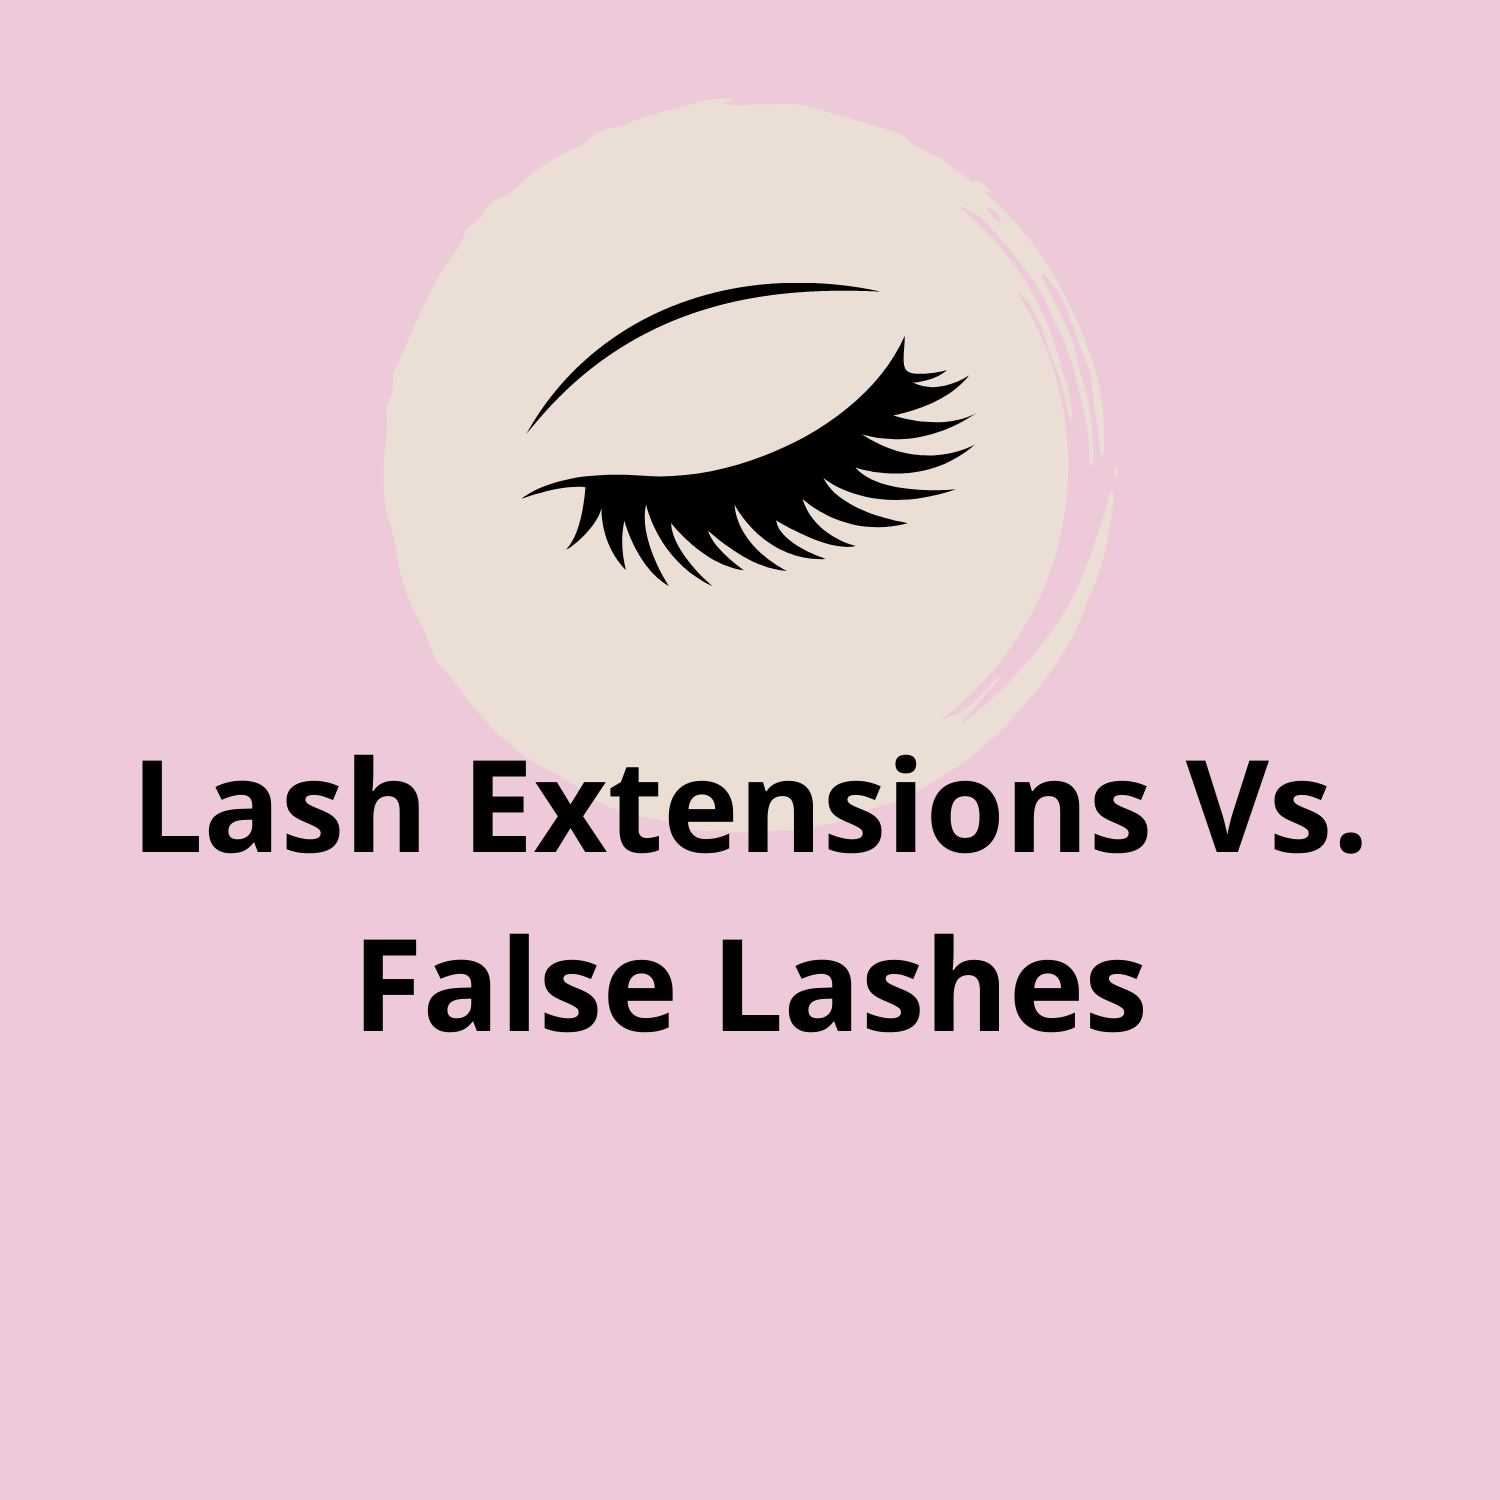 Lash Extensions Vs. False Lashes – Which One to Choose?